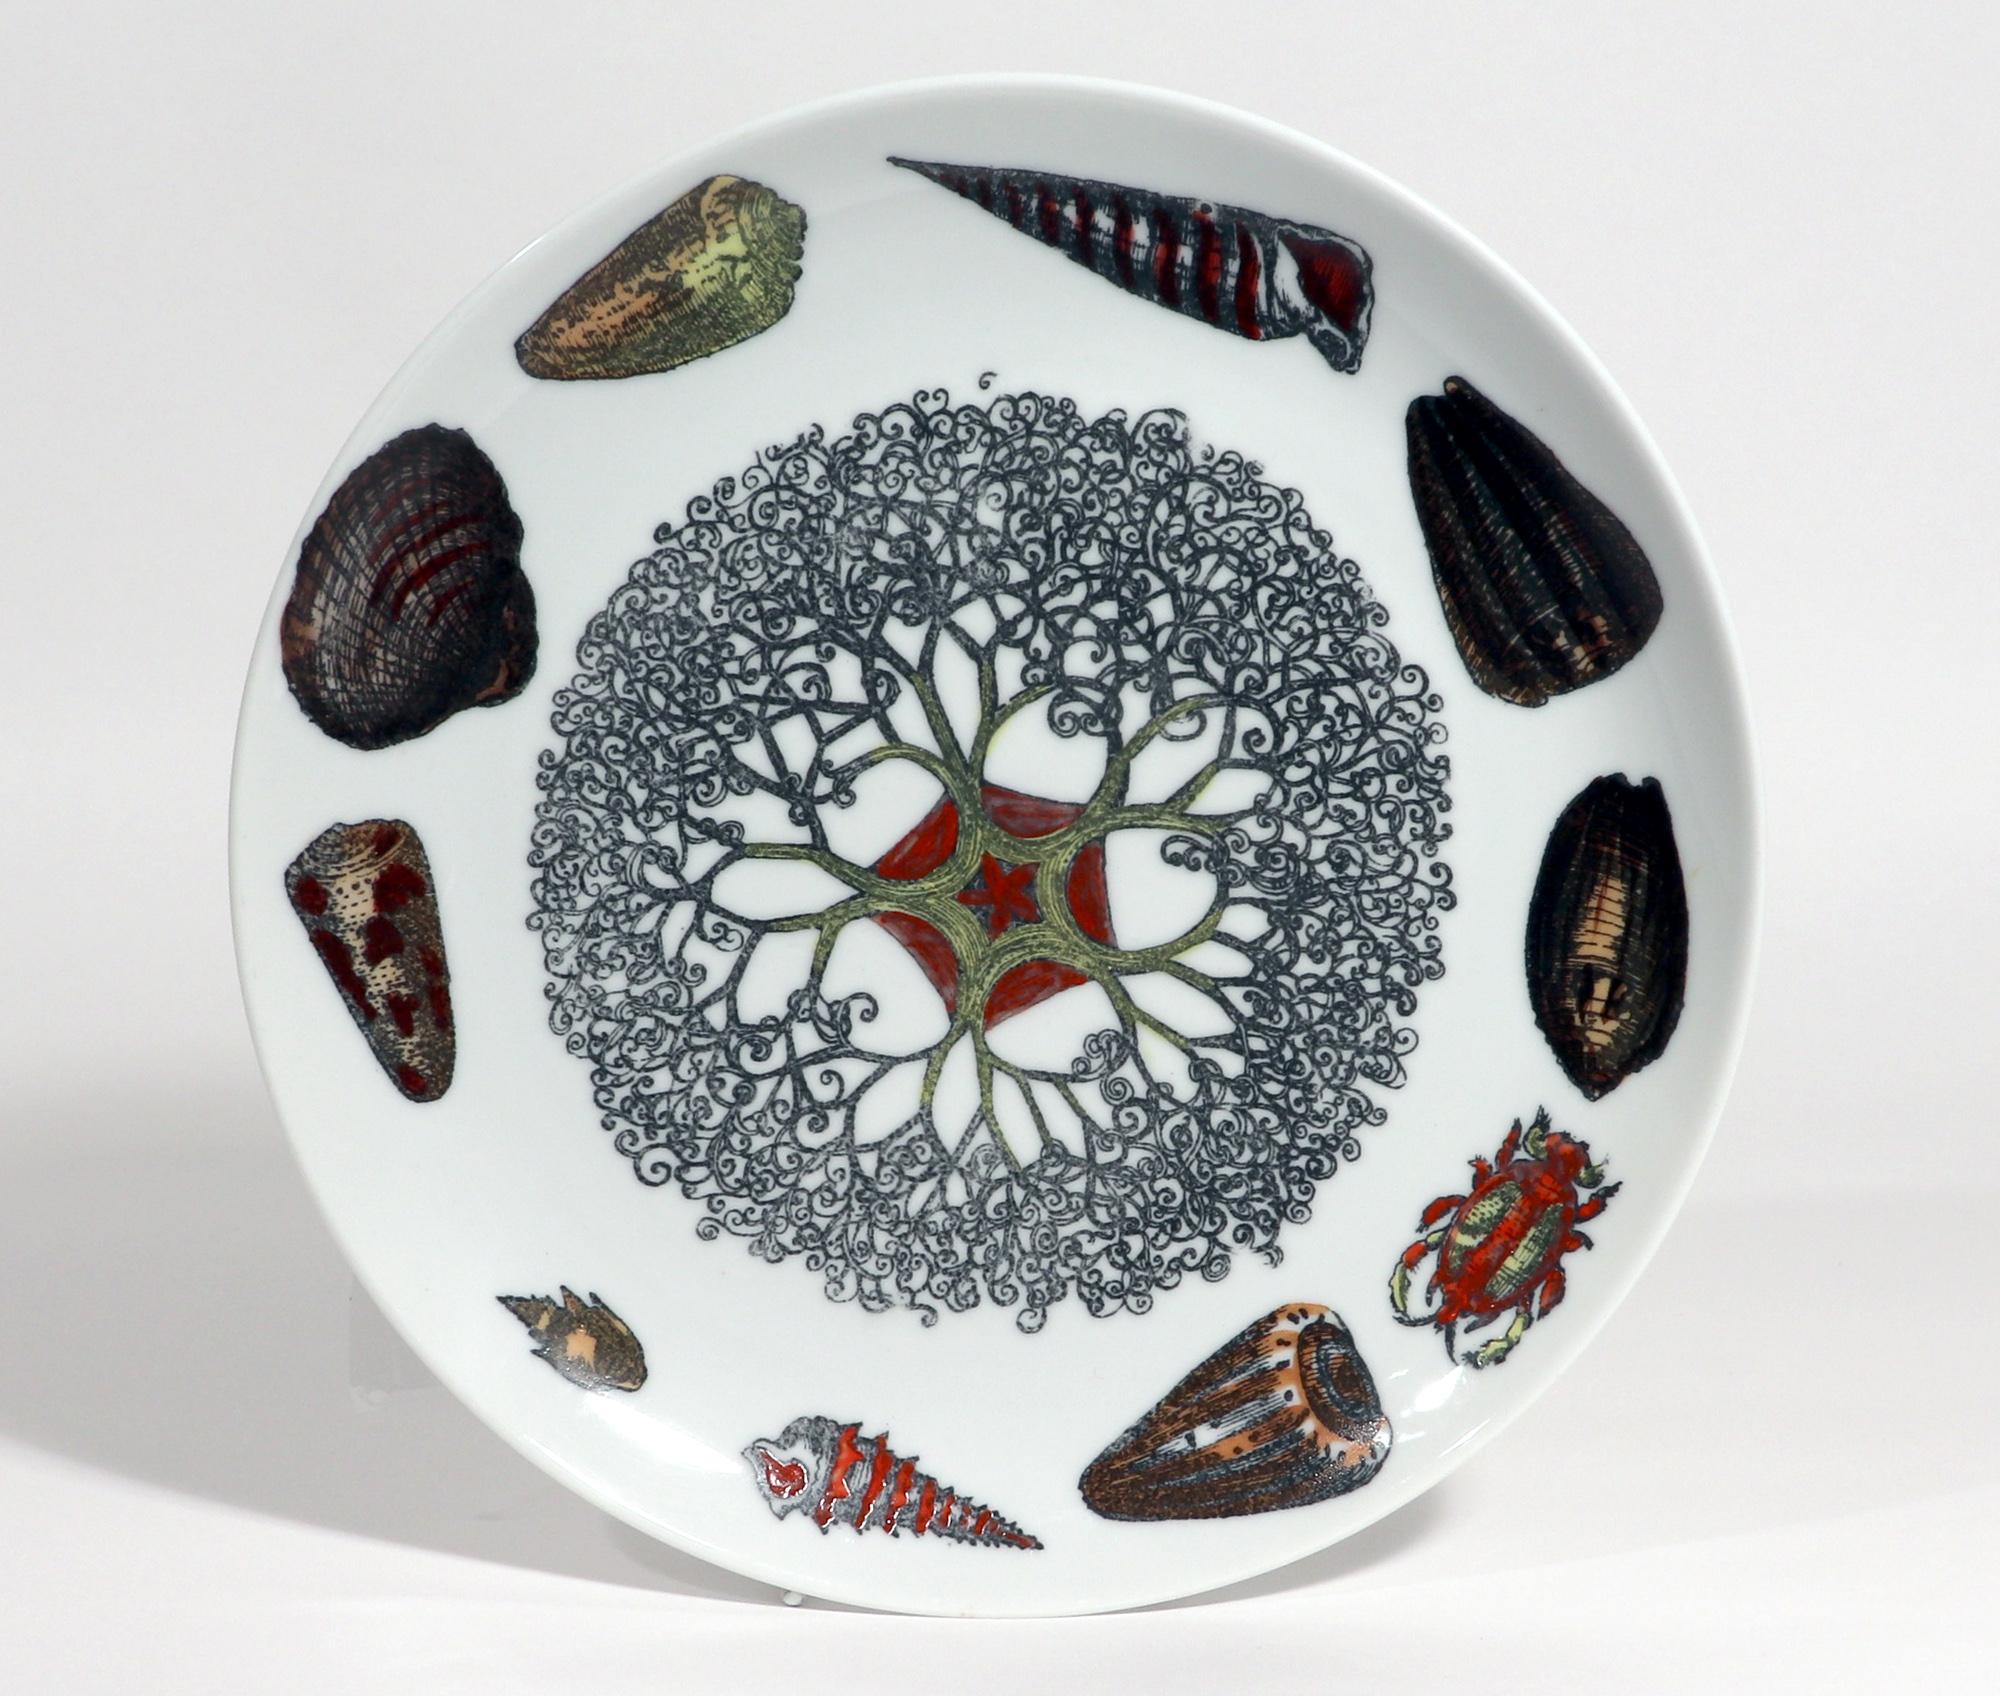 Piero Fornasetti Porcelain Conchiglie Seashell Plate With Snails and Mollusks,
#9,
Circa 1960s-70s
The Fornasetti plate is decorated in the Conchiglie pattern which depicts different sea shells and sea anemones. The plate is transfer printed and